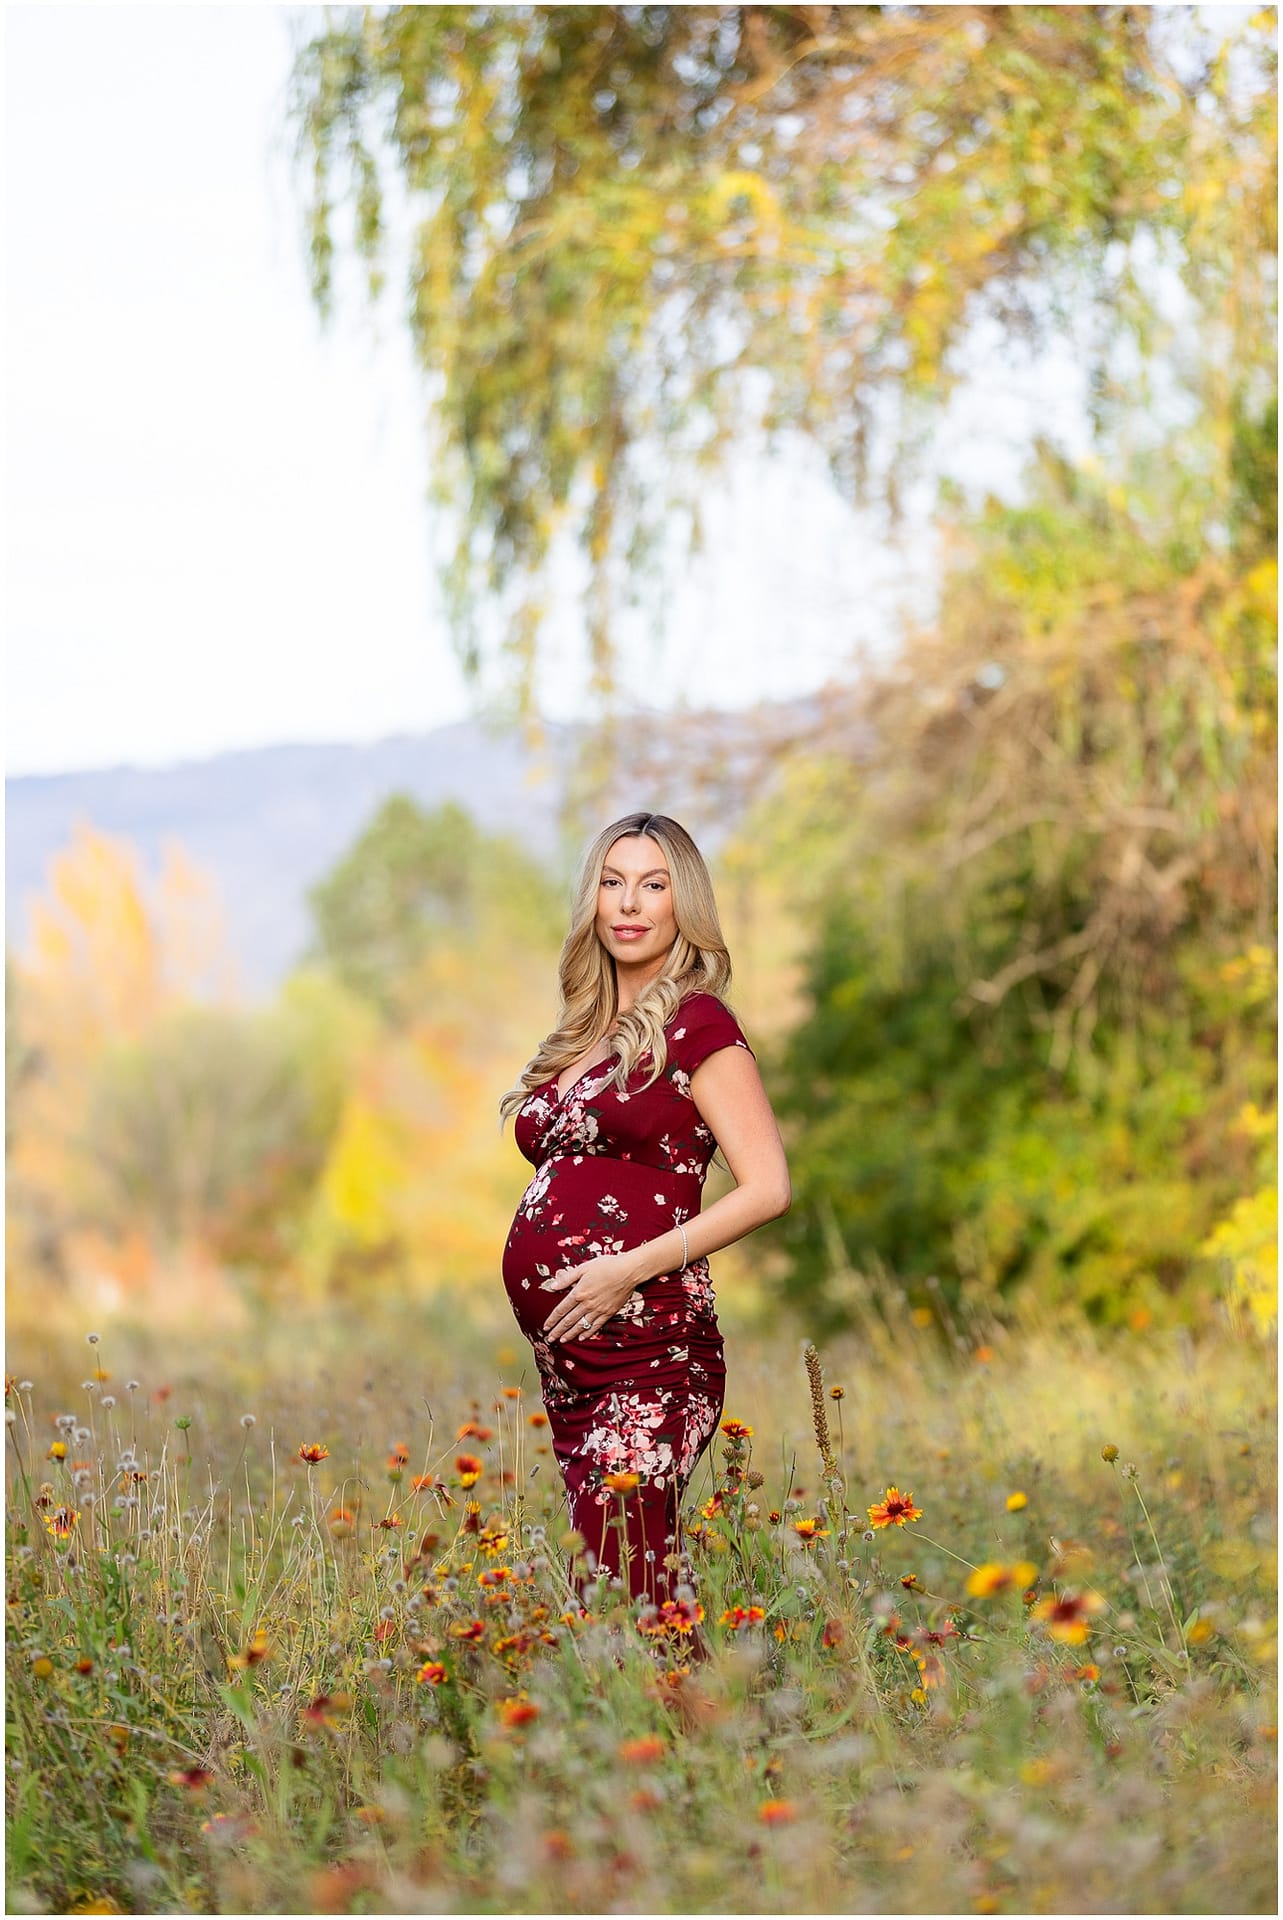 Mom stands in field of wildflowers cradling baby bump. Photo by Tiffany Hix Photography.